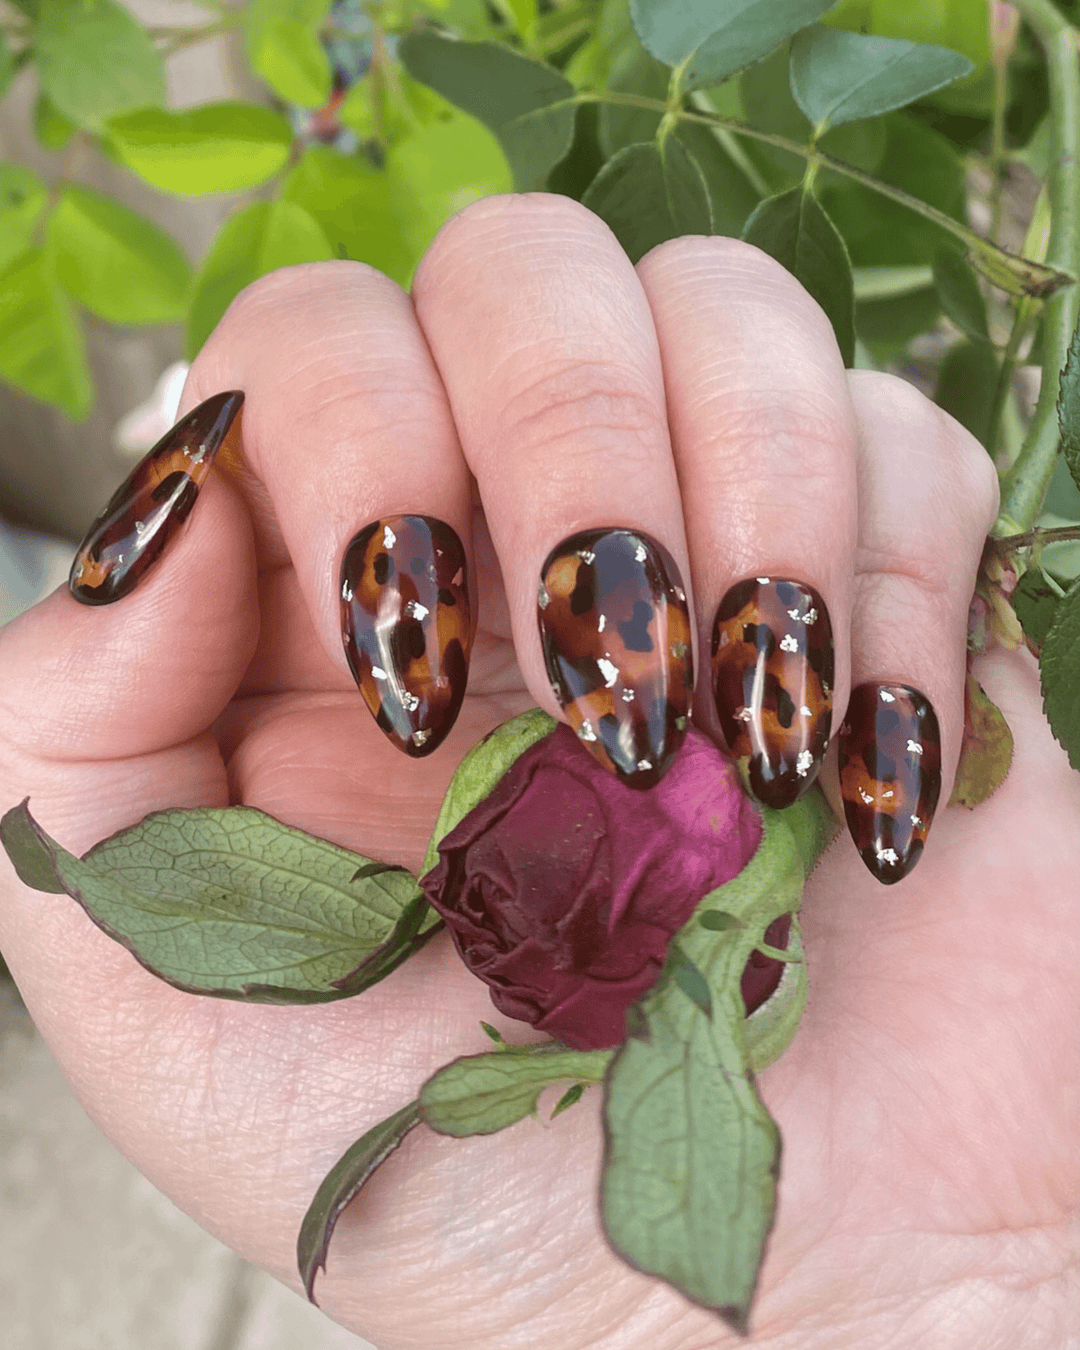 Tortie Nails with Gold Flakes